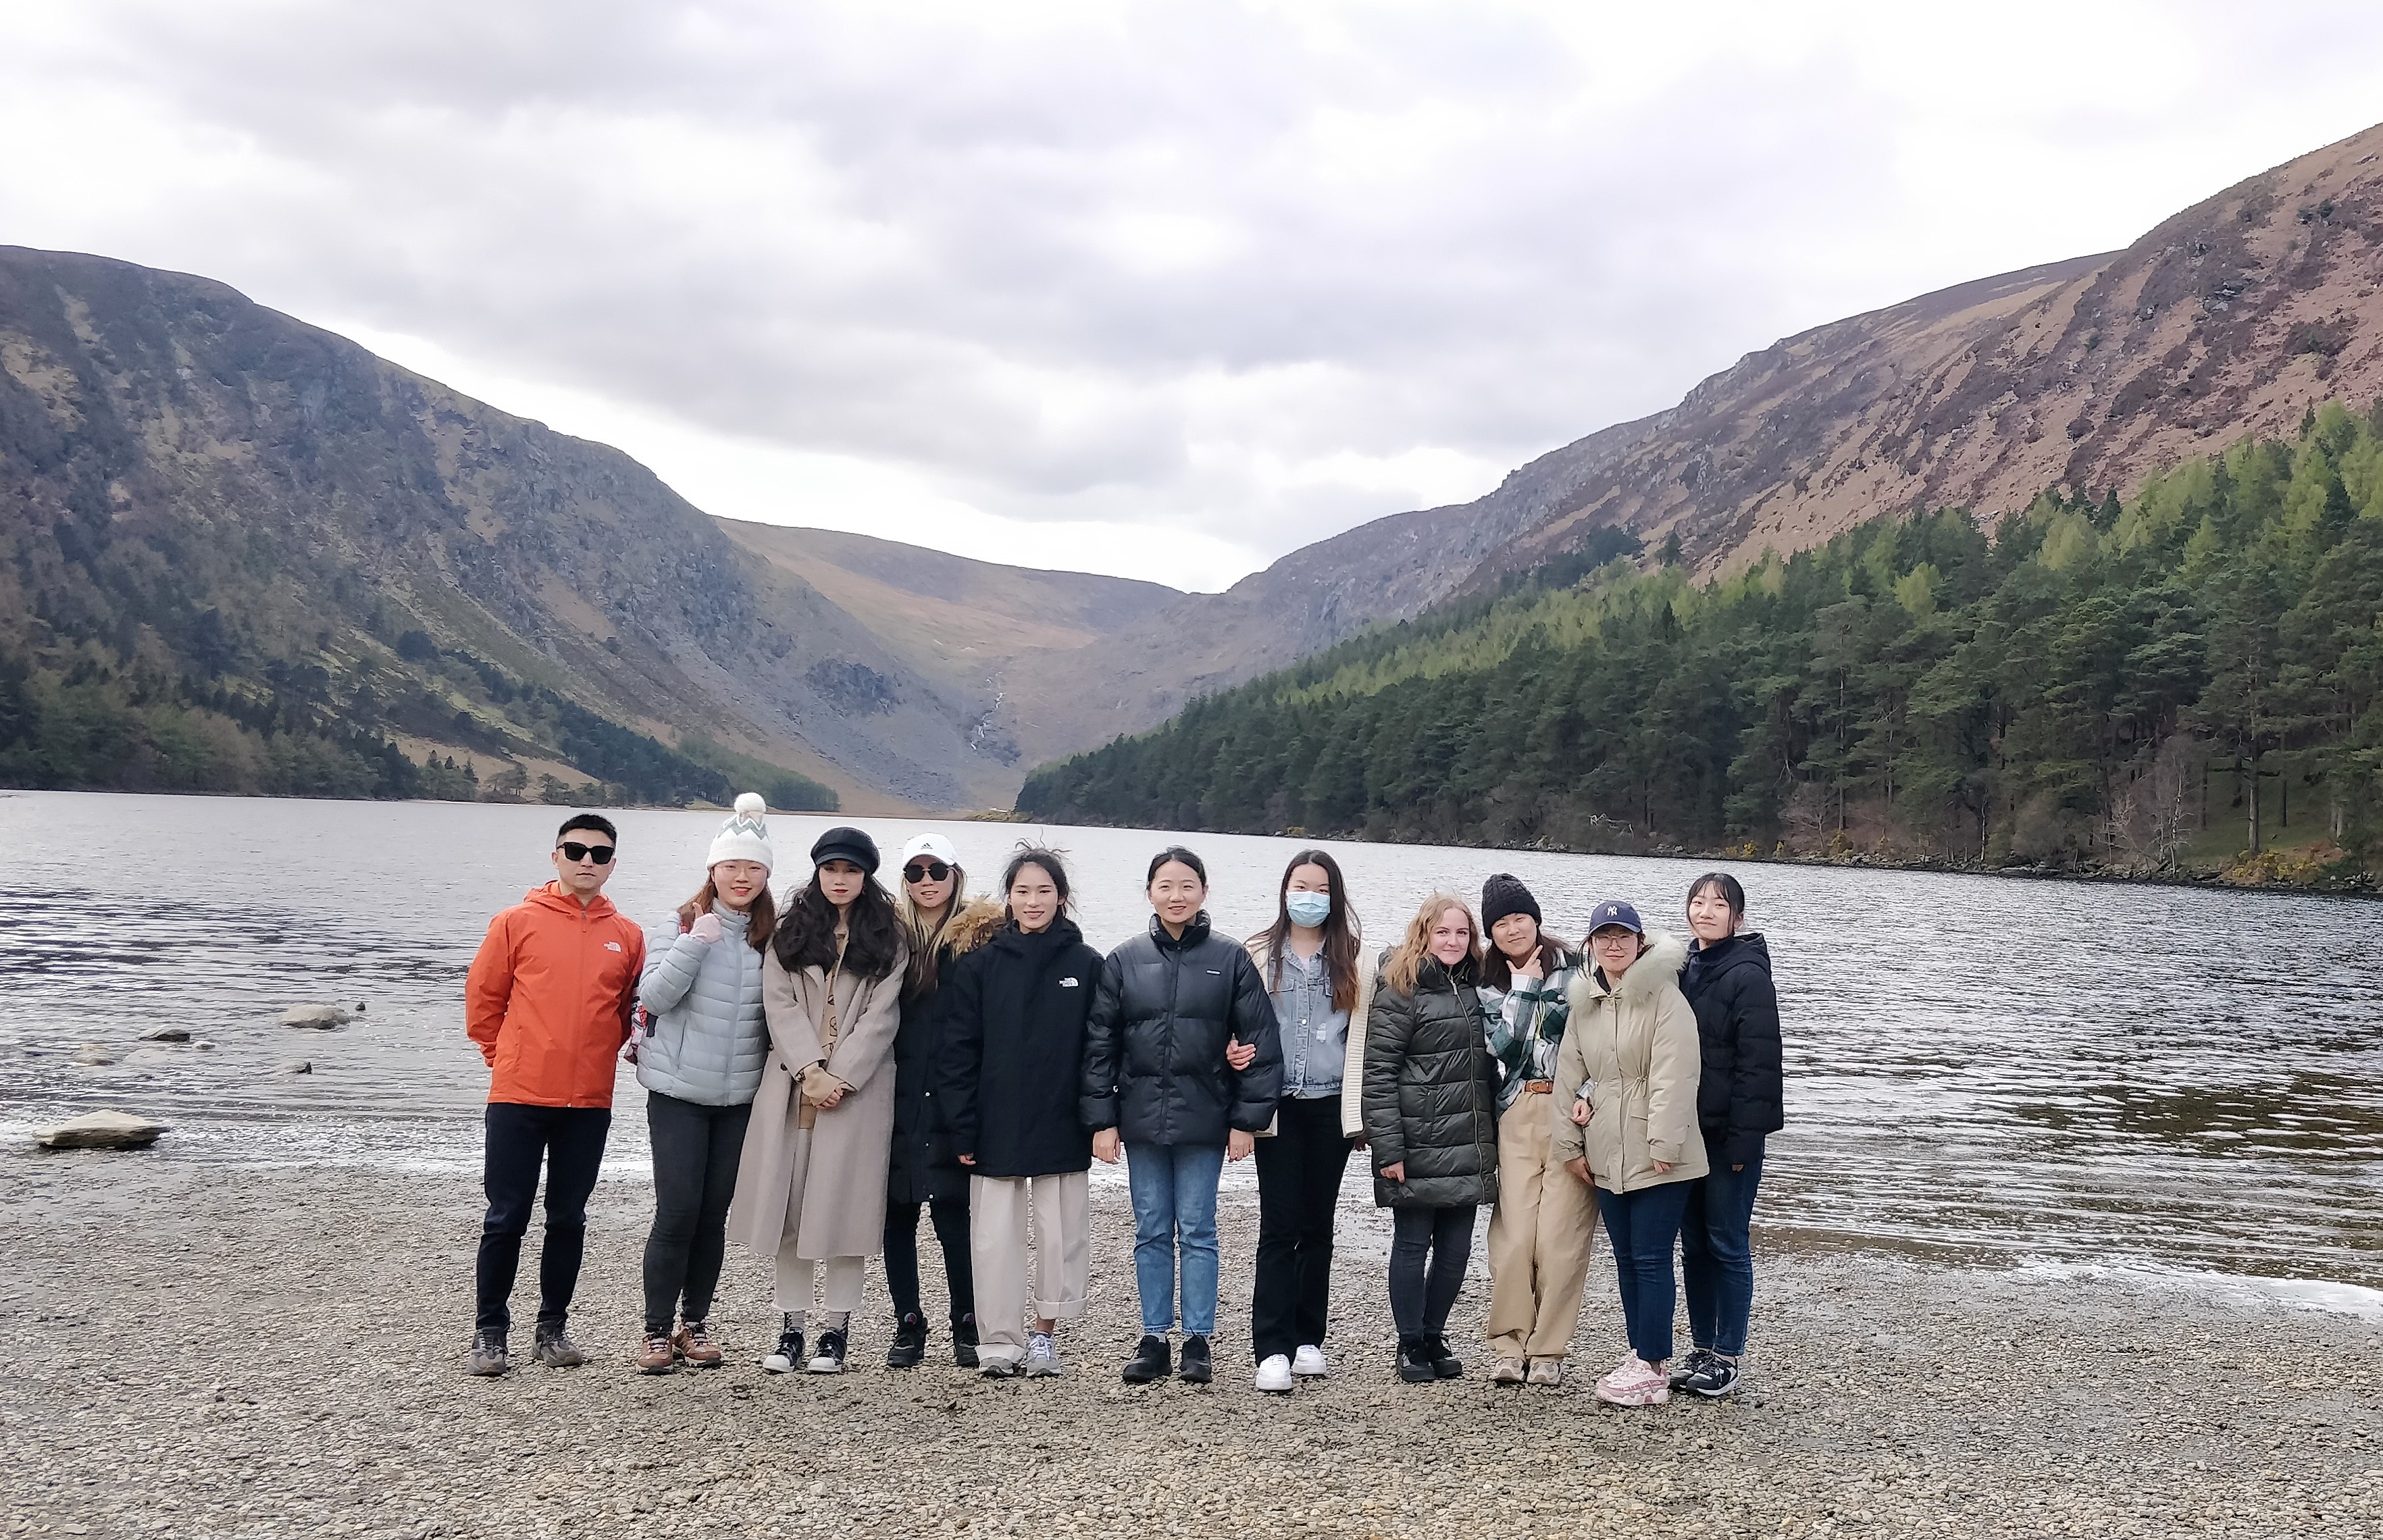 The Pre-Sessional Student Experience - make the most of your time in Ireland!